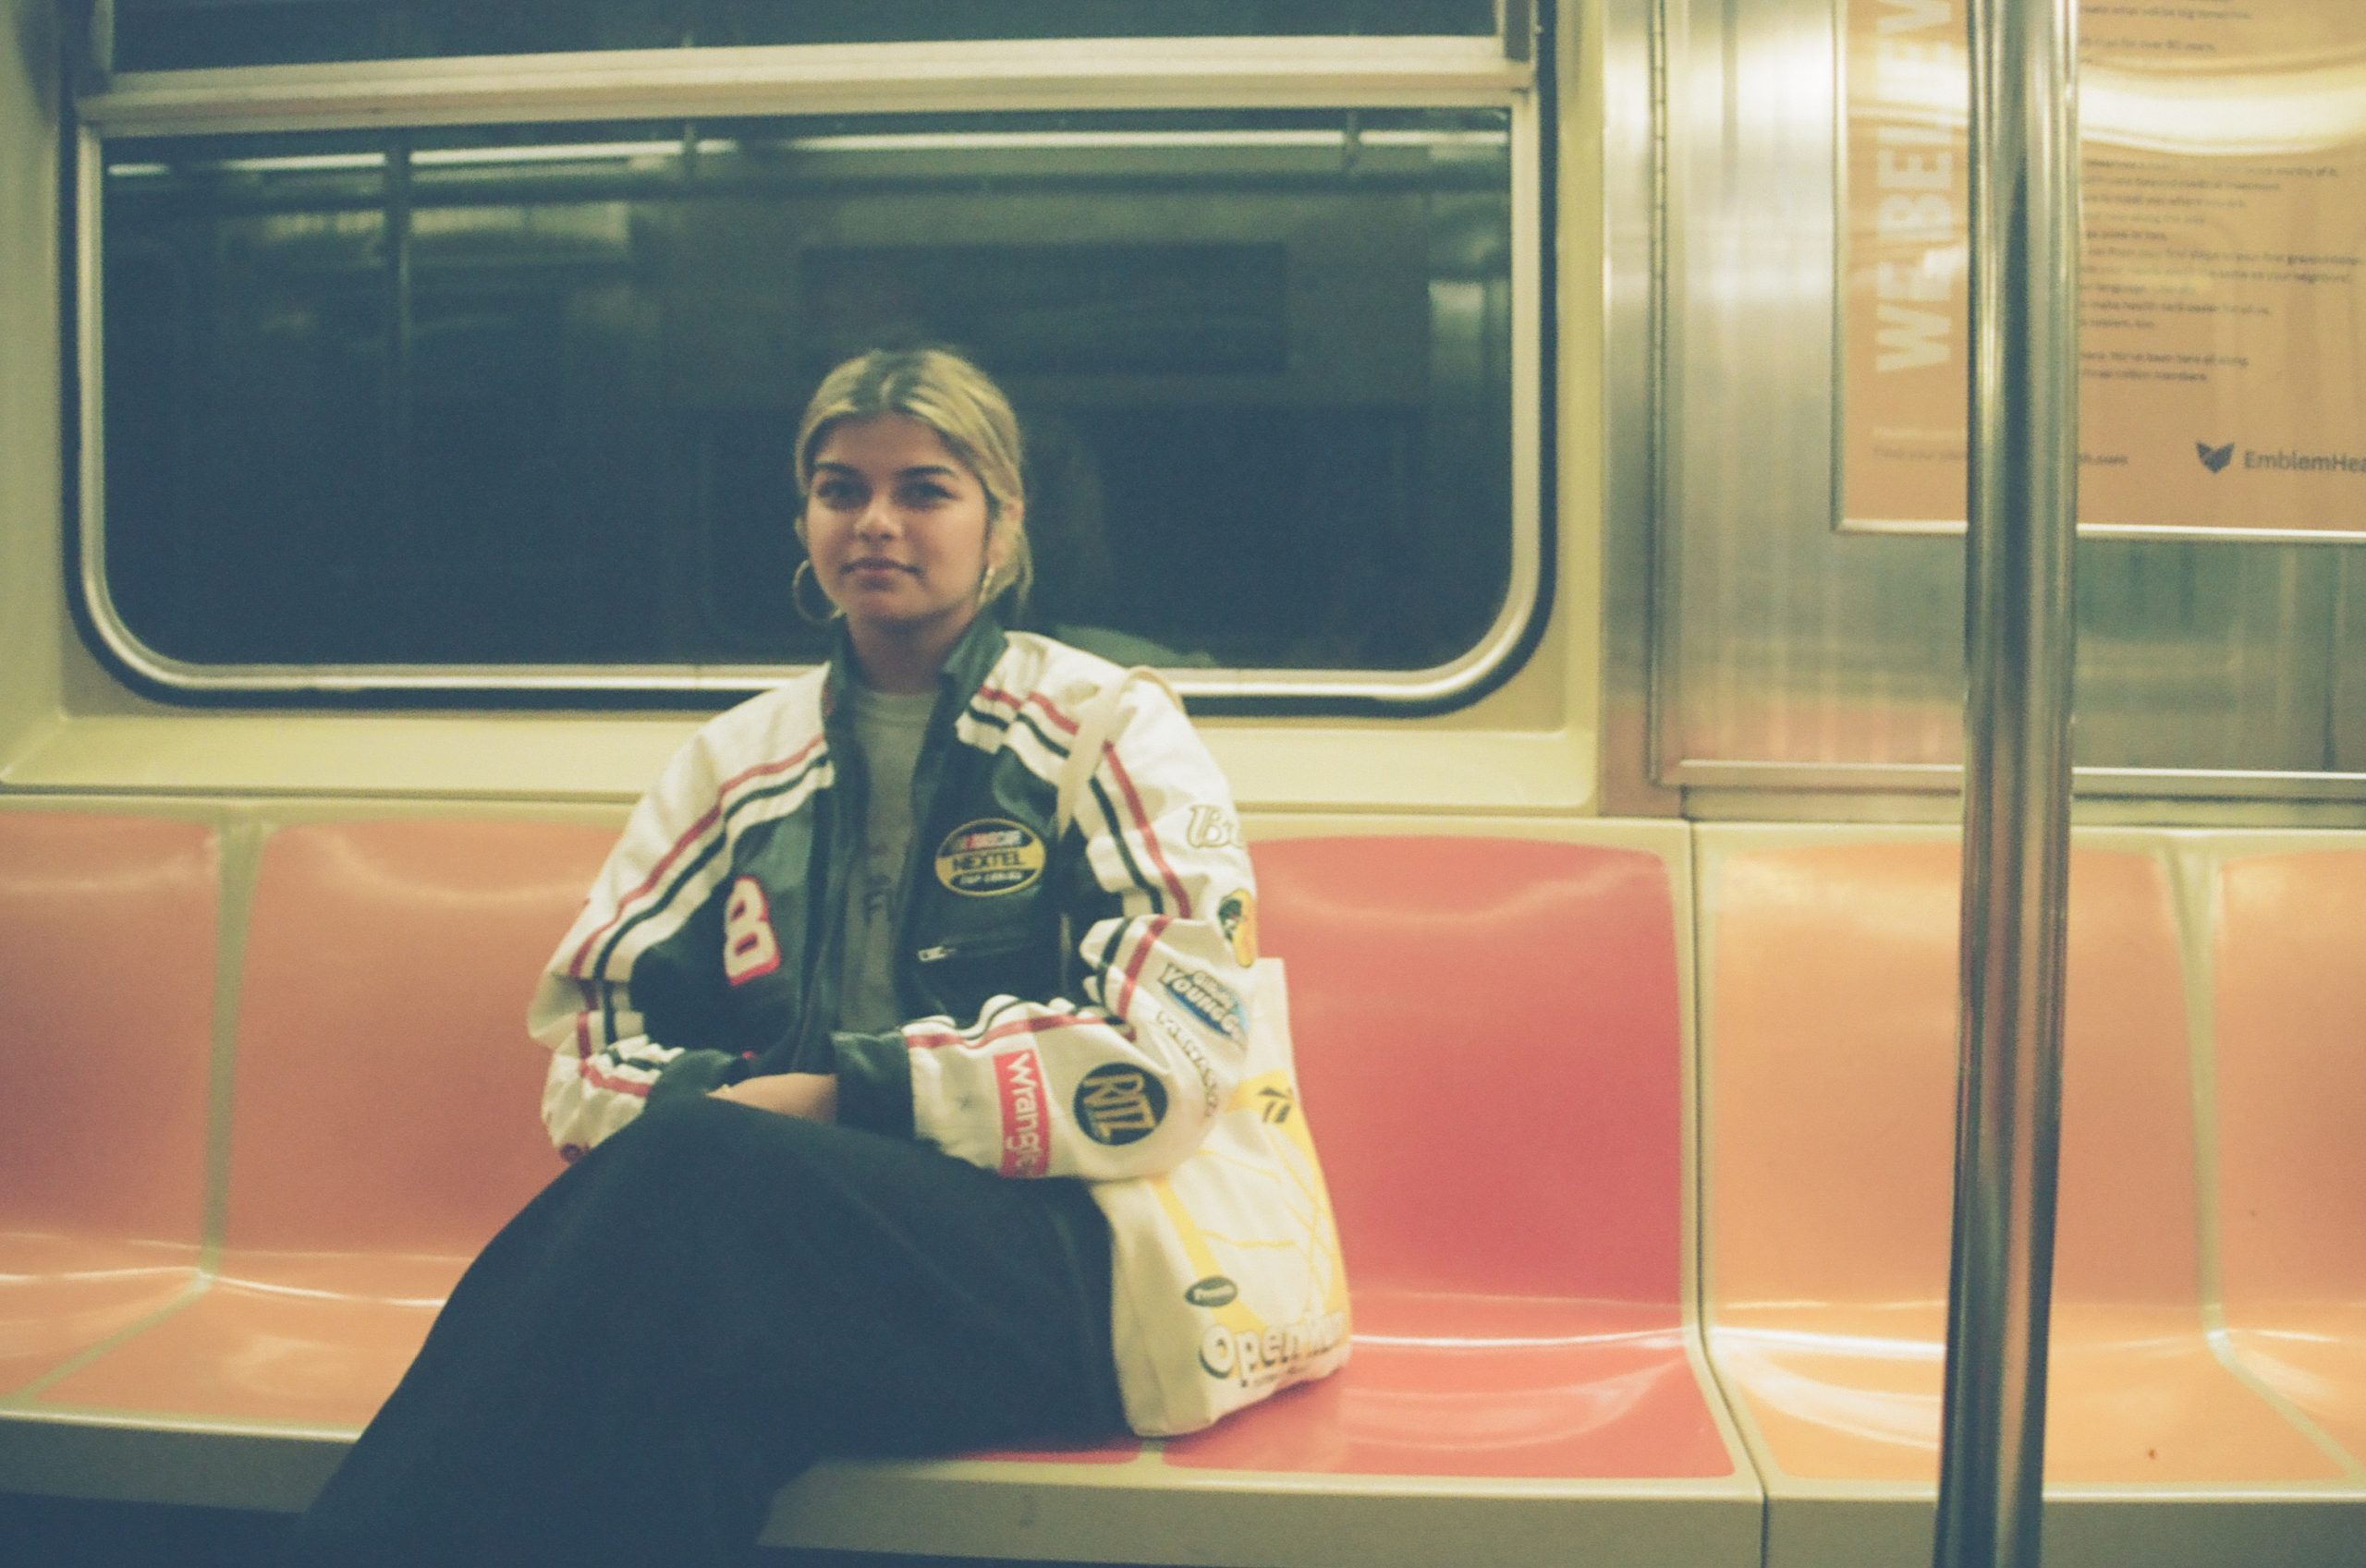 A medium dark skinned person with blonde hair riding on a subway train.